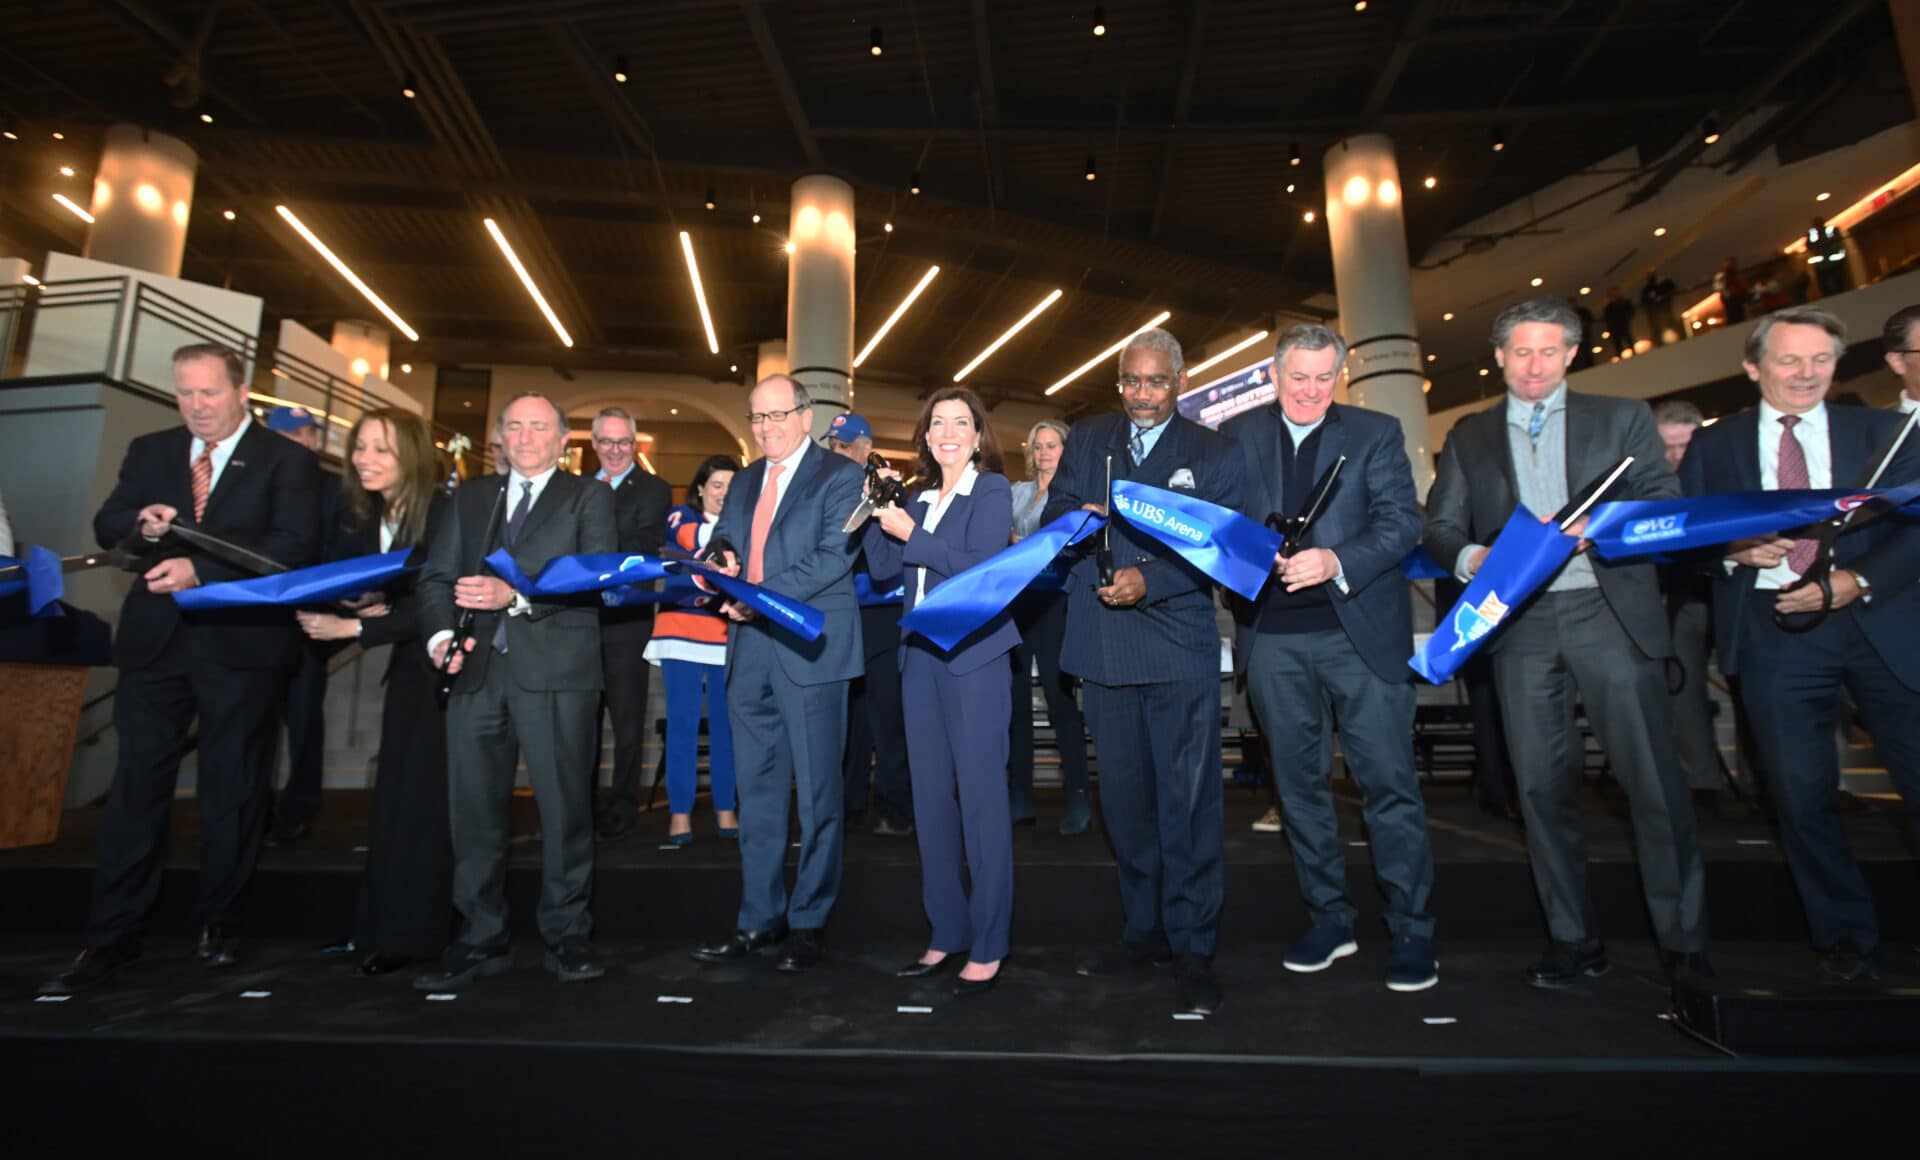 Jubilant UBS Arena Ribbon- Cutting Ceremony A Long Time Coming For Islanders